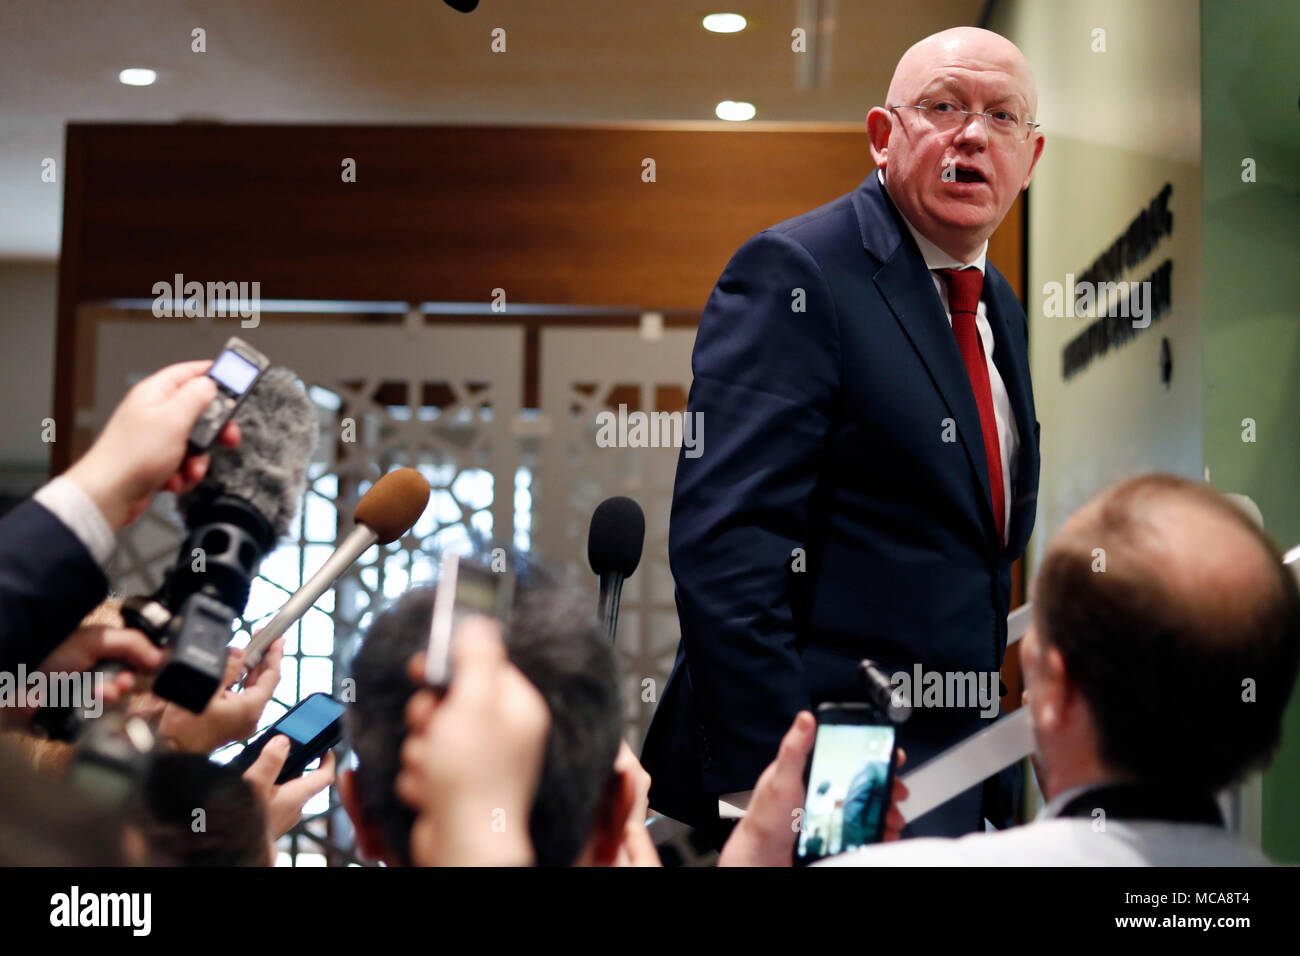 Untied Nations. 14th Apr, 2018. Russian Ambassador to the United Nations Vassily Nebenzia speaks to journalists after a Security Council emergency meeting on Syria at the UN headquarters in New York, April 14, 2018. A Russian-drafted resolution, which would have condemned the military strikes on Syria carried out by the United States, France and Britain, failed to be adopted by the Security Council. Credit: Li Muzi/Xinhua/Alamy Live News Stock Photo